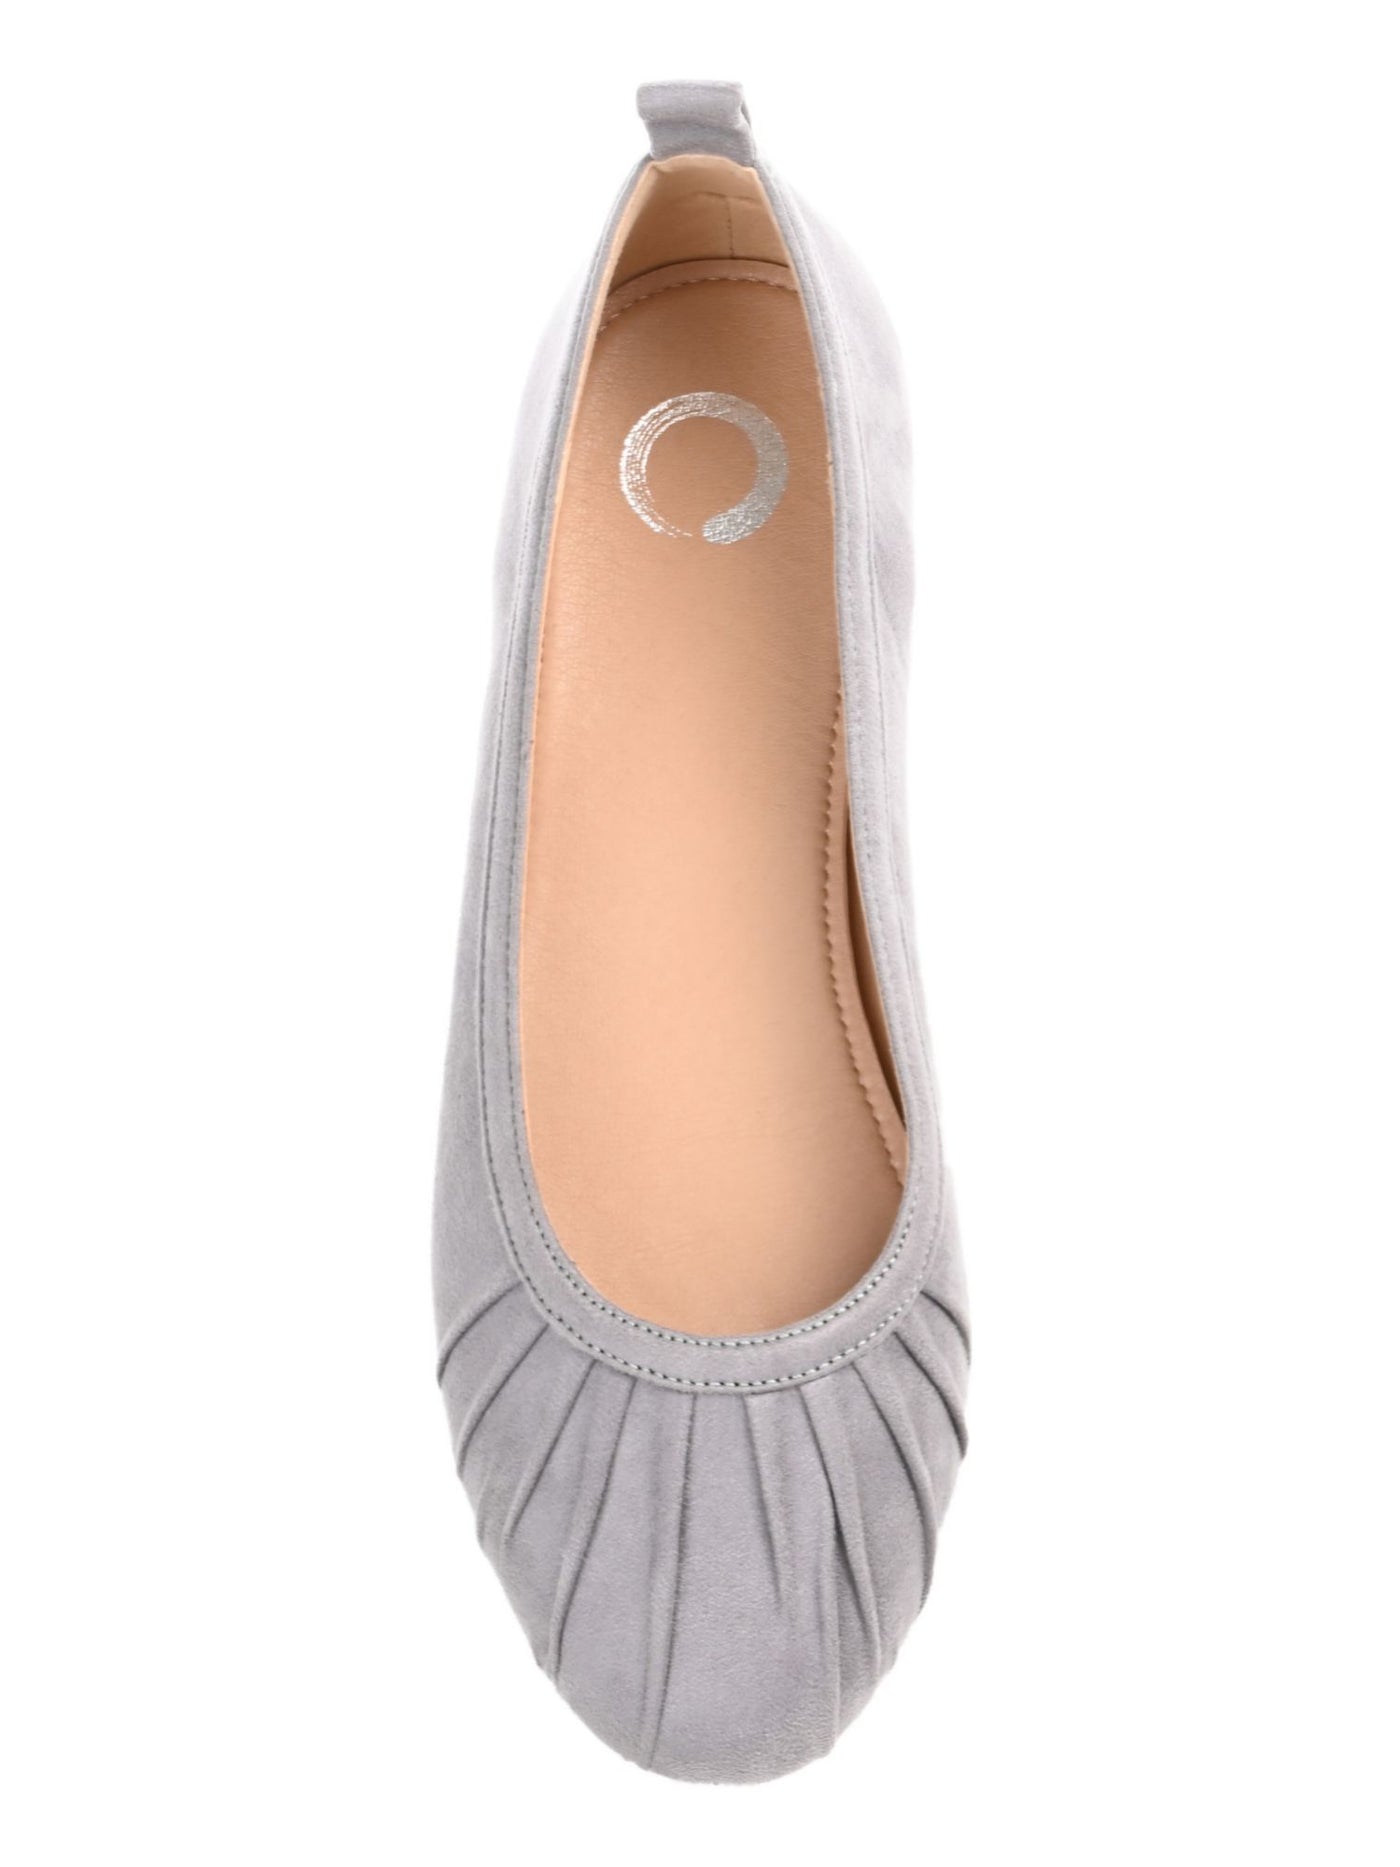 JOURNEE COLLECTION Womens Gray Back Pull-Tab Ruched Cushioned Tannya Round Toe Slip On Ballet Flats 7.5 M